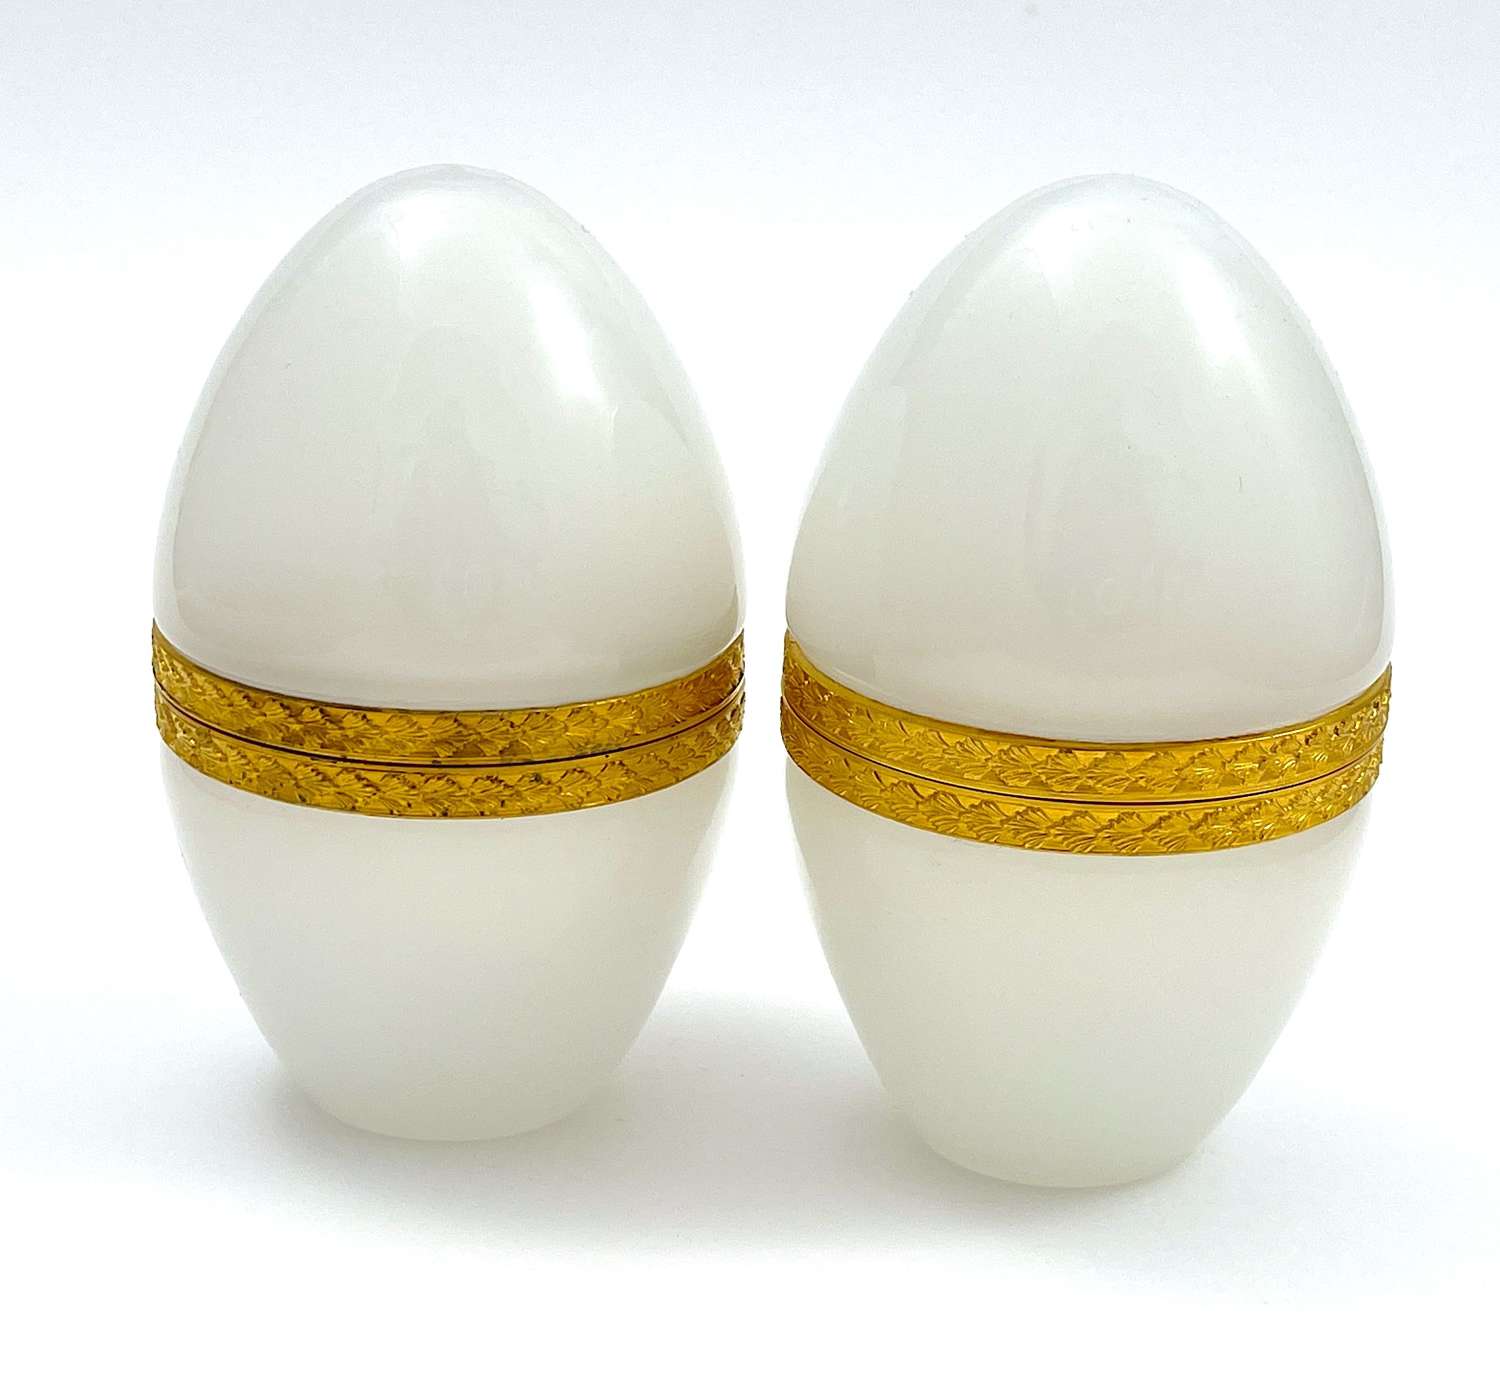 A Pair Antique Murano White Opaline Glass Egg Shaped Casket Boxes